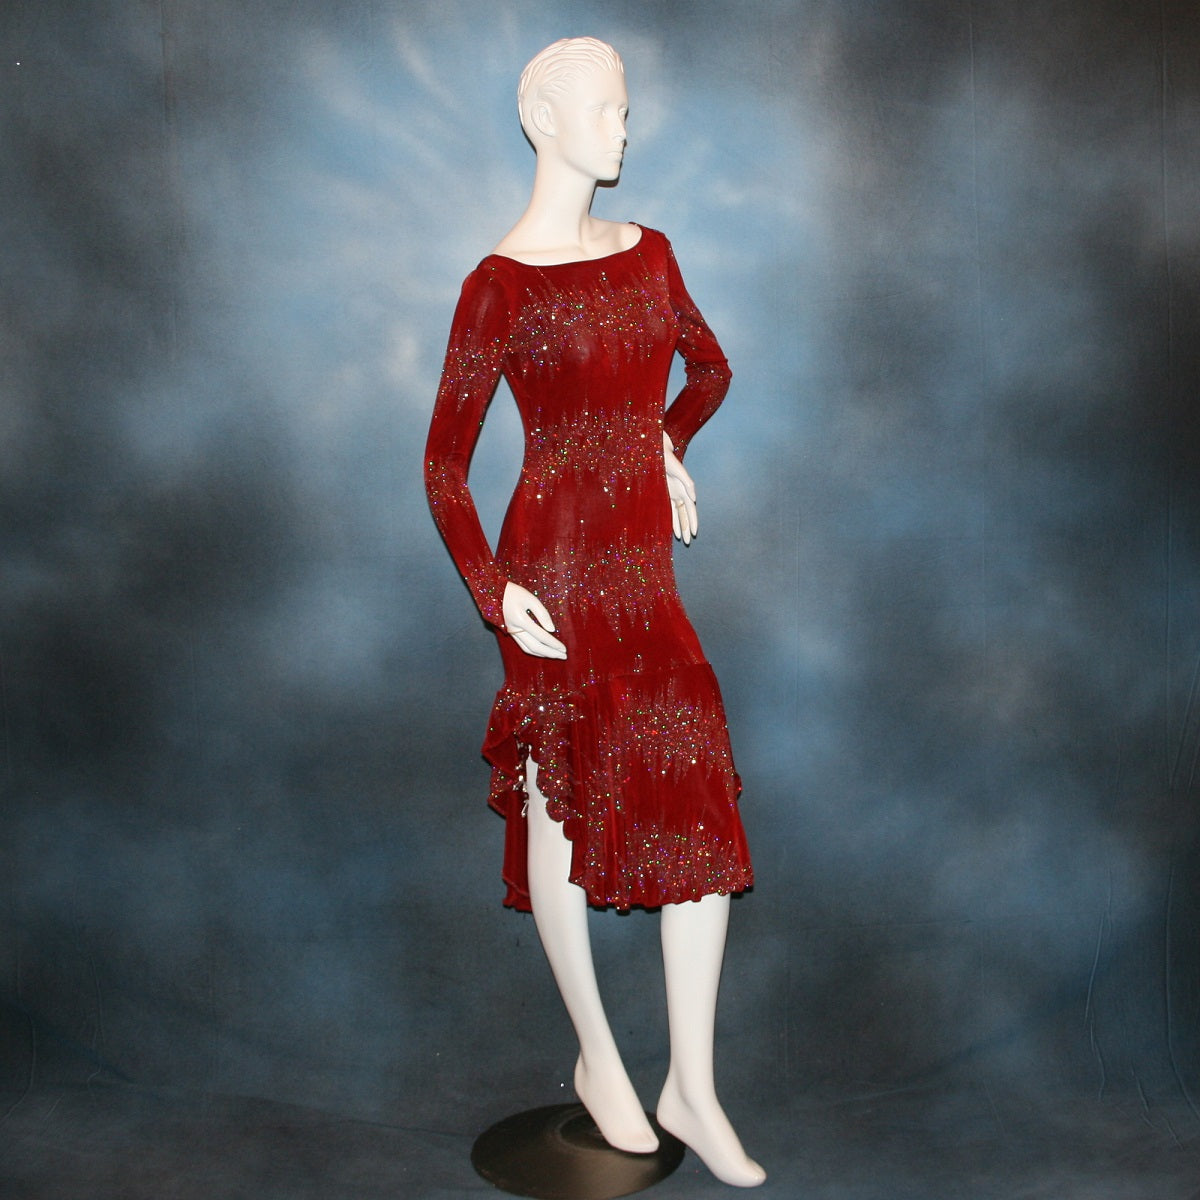 side view of Deep scarlette red Latin/rhythm/tango dress created in glitter slinky with an awesome electrifying glitter pattern features lattice detailing in the back, long sleeves with Swarovski hand beading in the skirt sides.